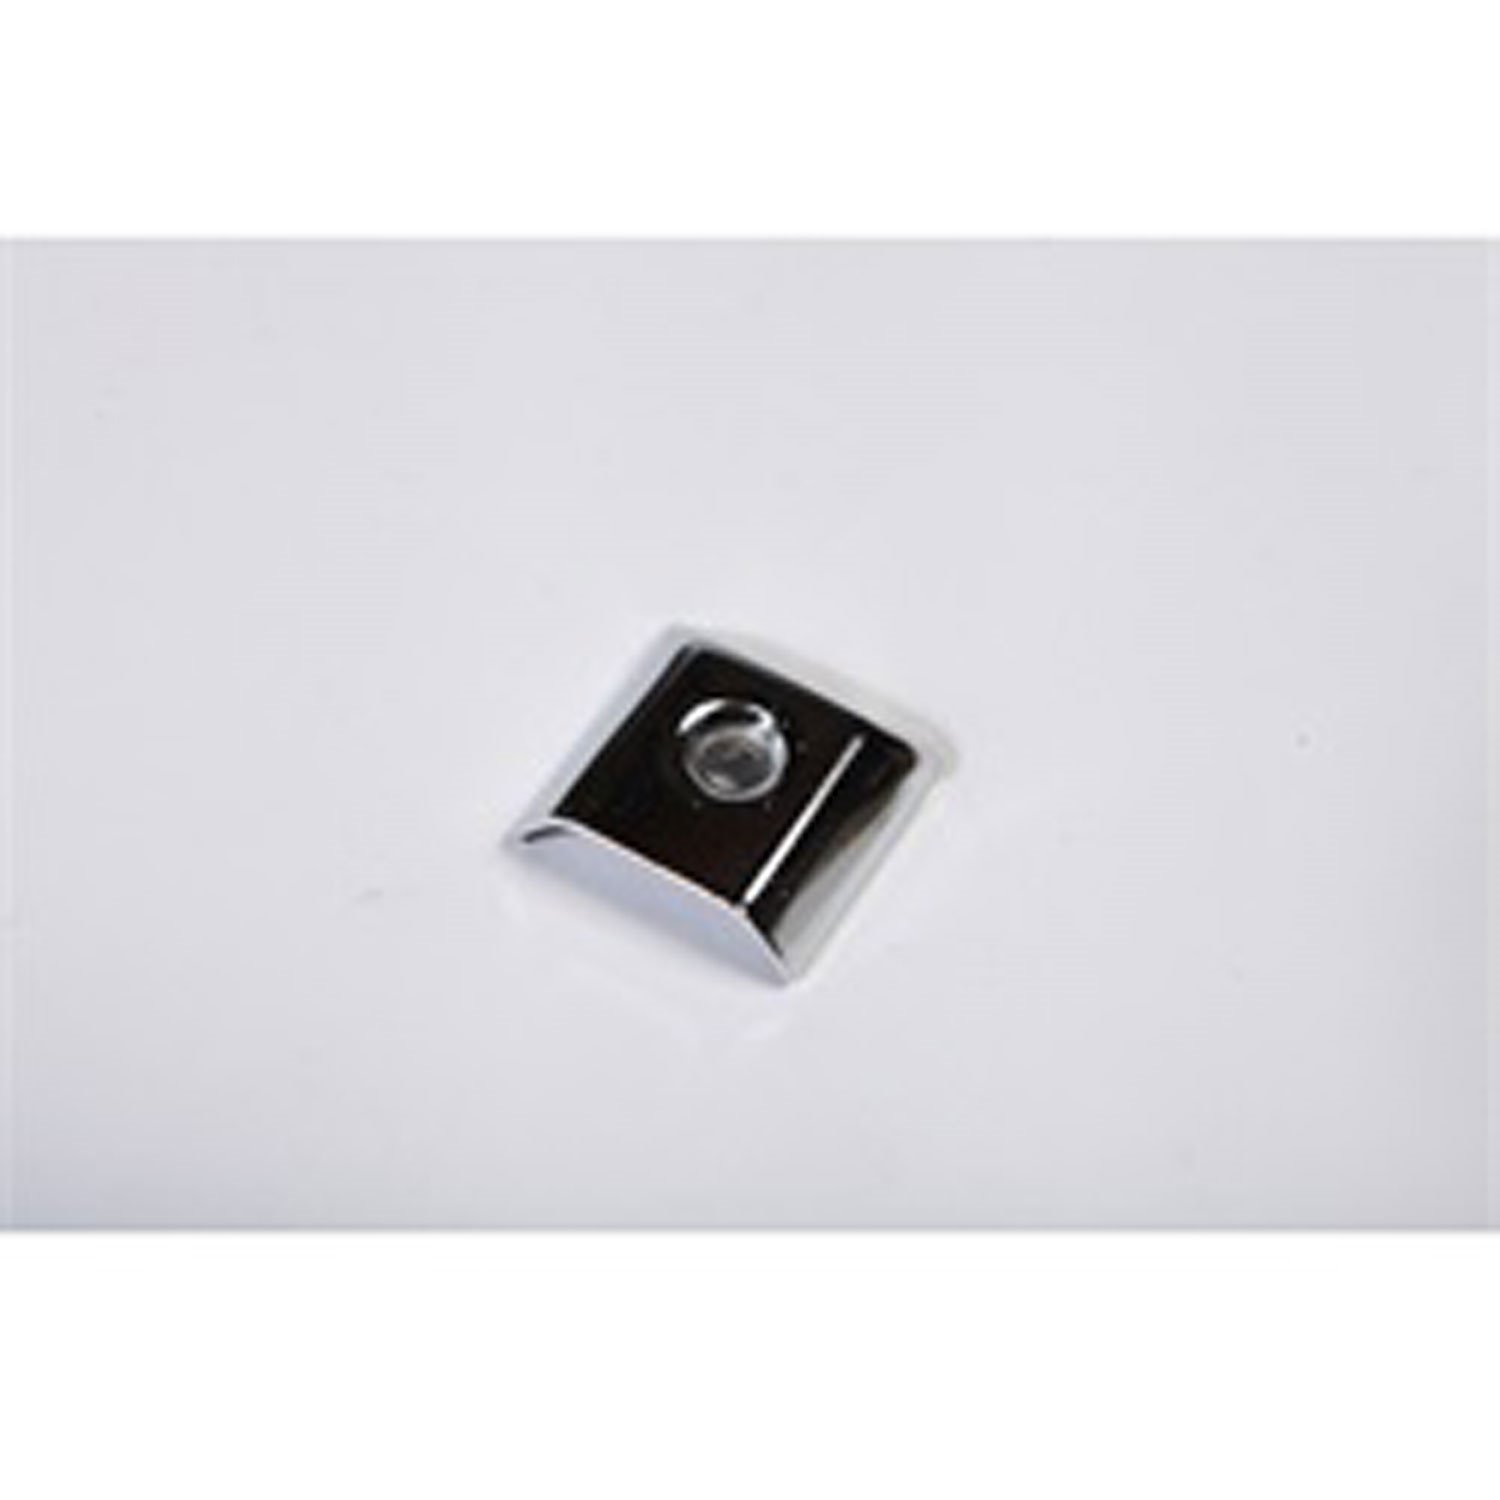 ReplacementChrome interior door pull end cap from Omix-ADA,